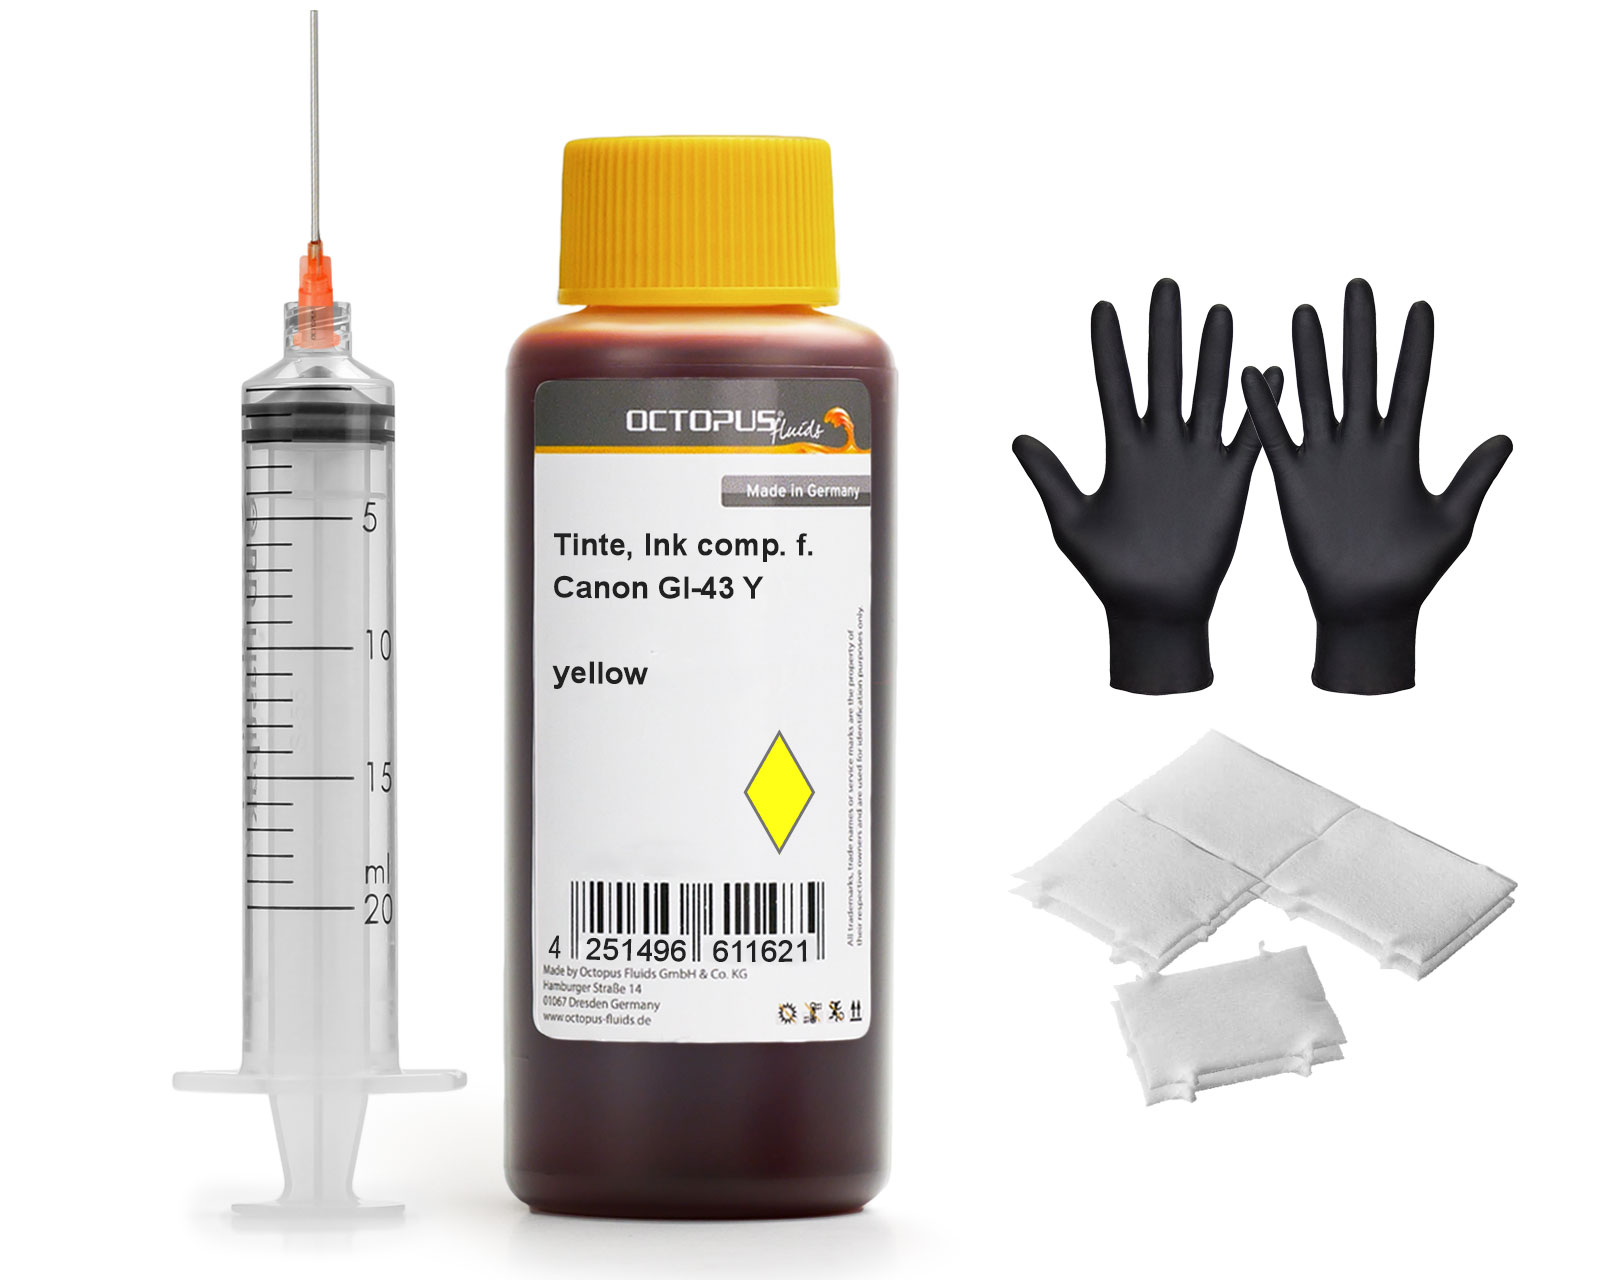 
Refill ink for Canon GI-43 Y Pixma G 540, G 640 MegaTank yellow